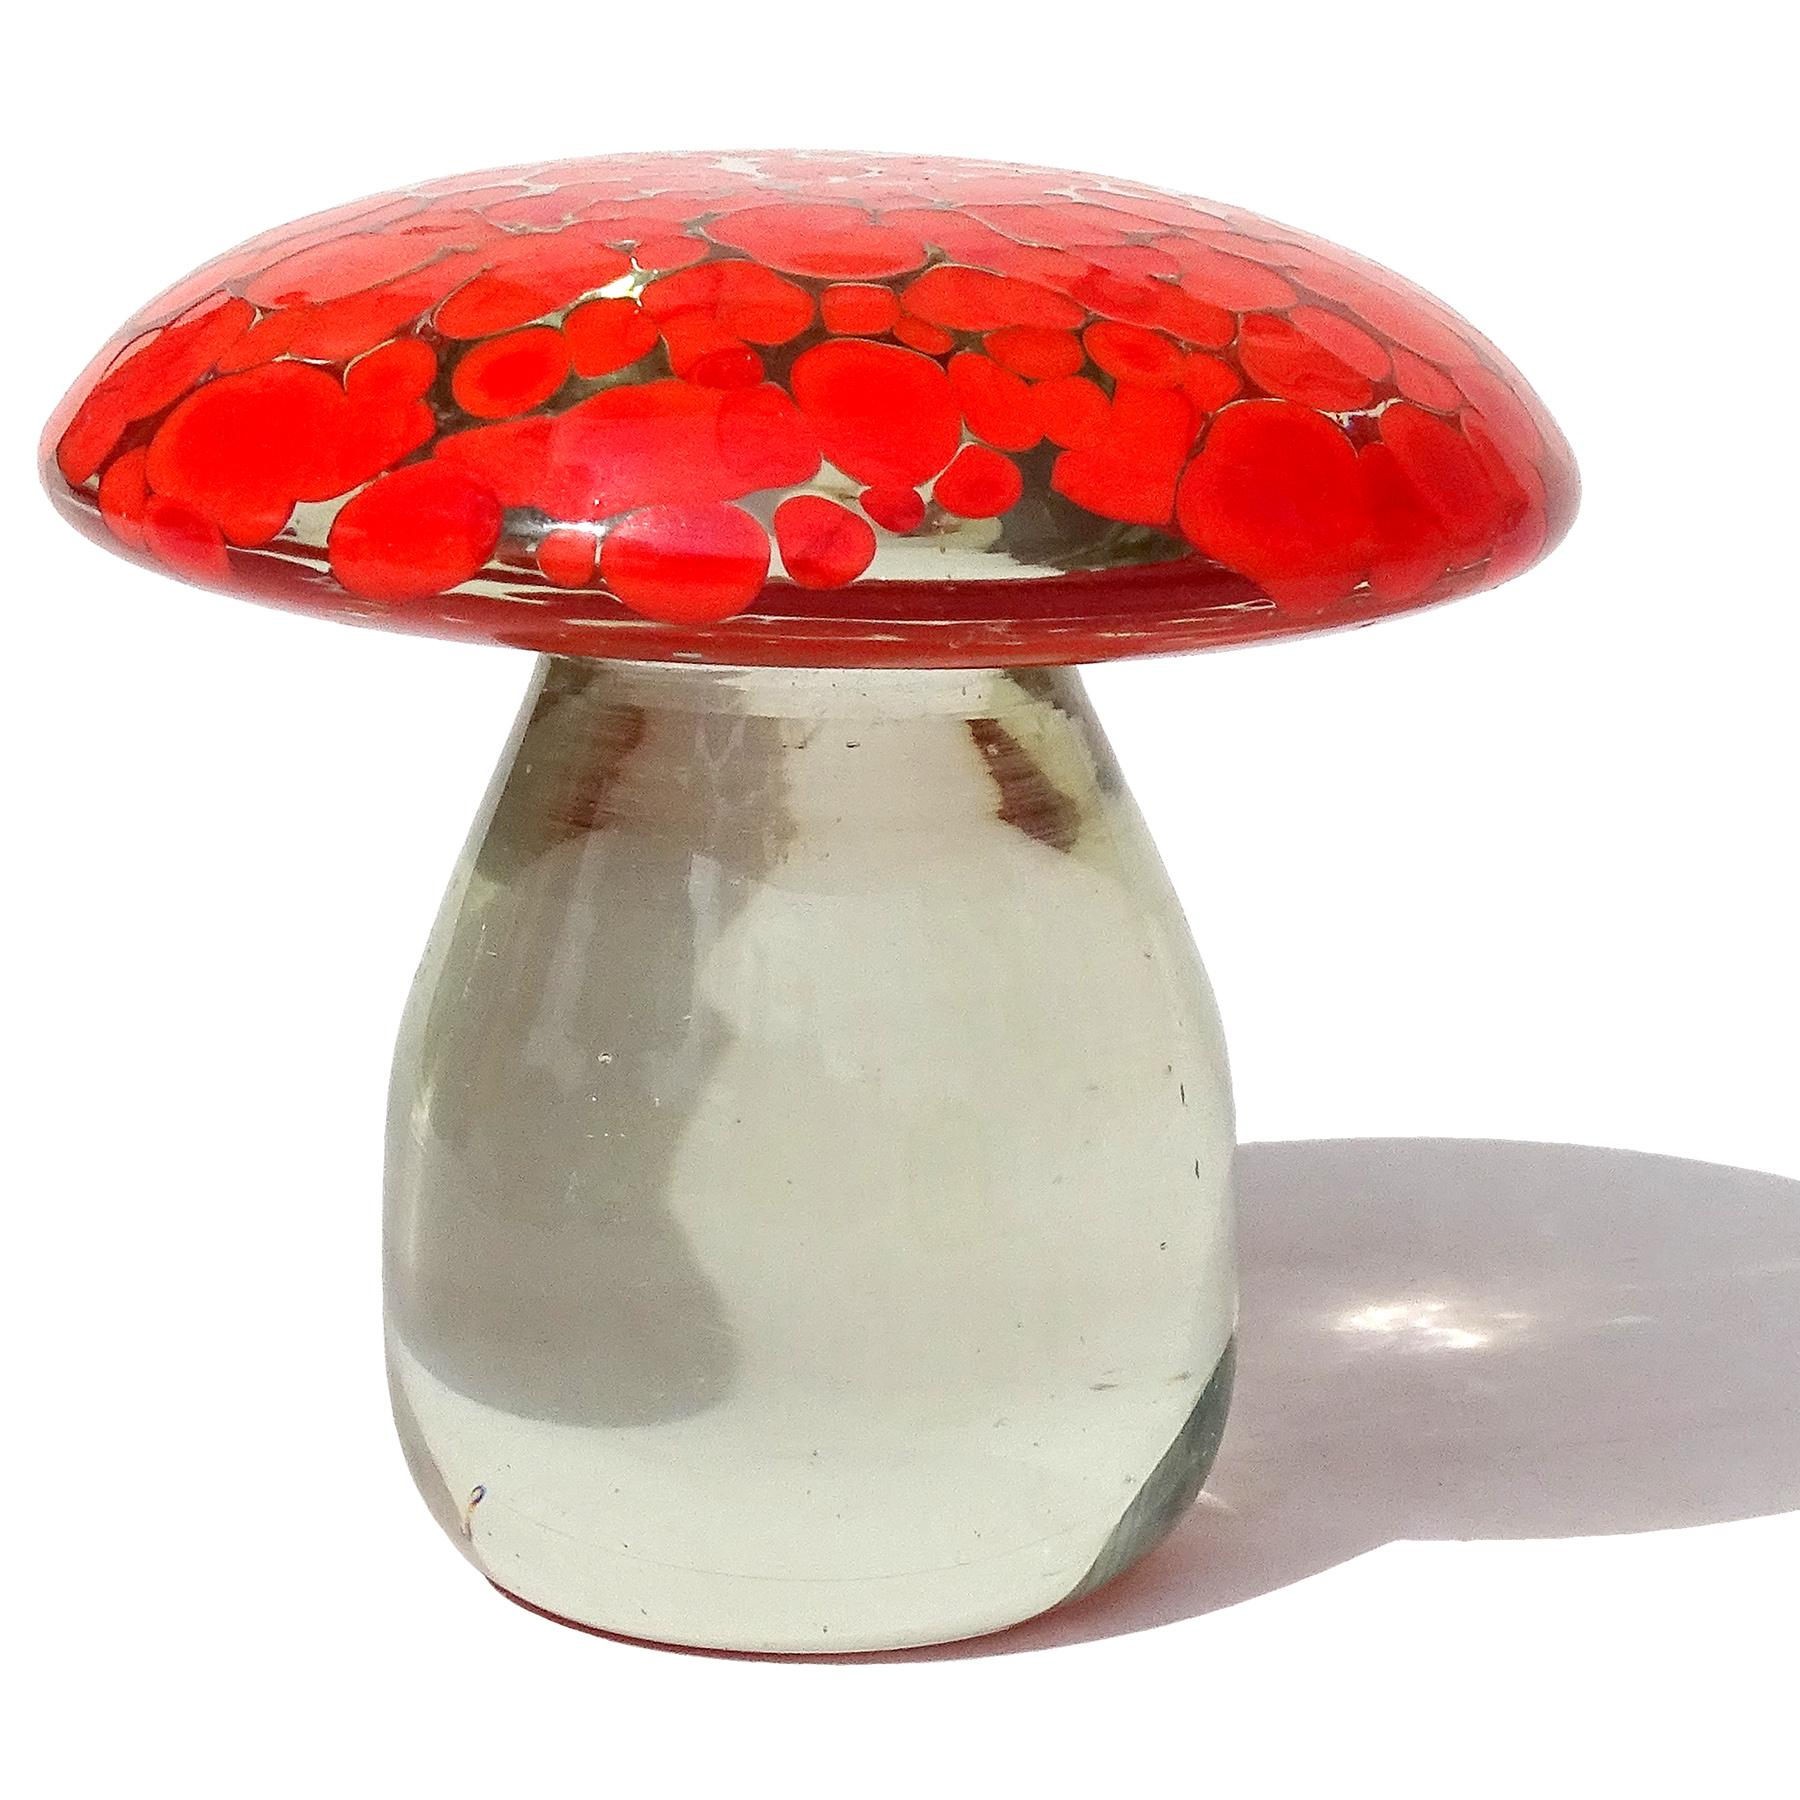 Beautiful vintage Murano hand blown clear body with spots Italian art glass mushroom / toadstool paperweight. Created for the Fornasa De Murano A L'Insegna Del Moreto company, by designer Galliano Ferro. I have previously owned several with the